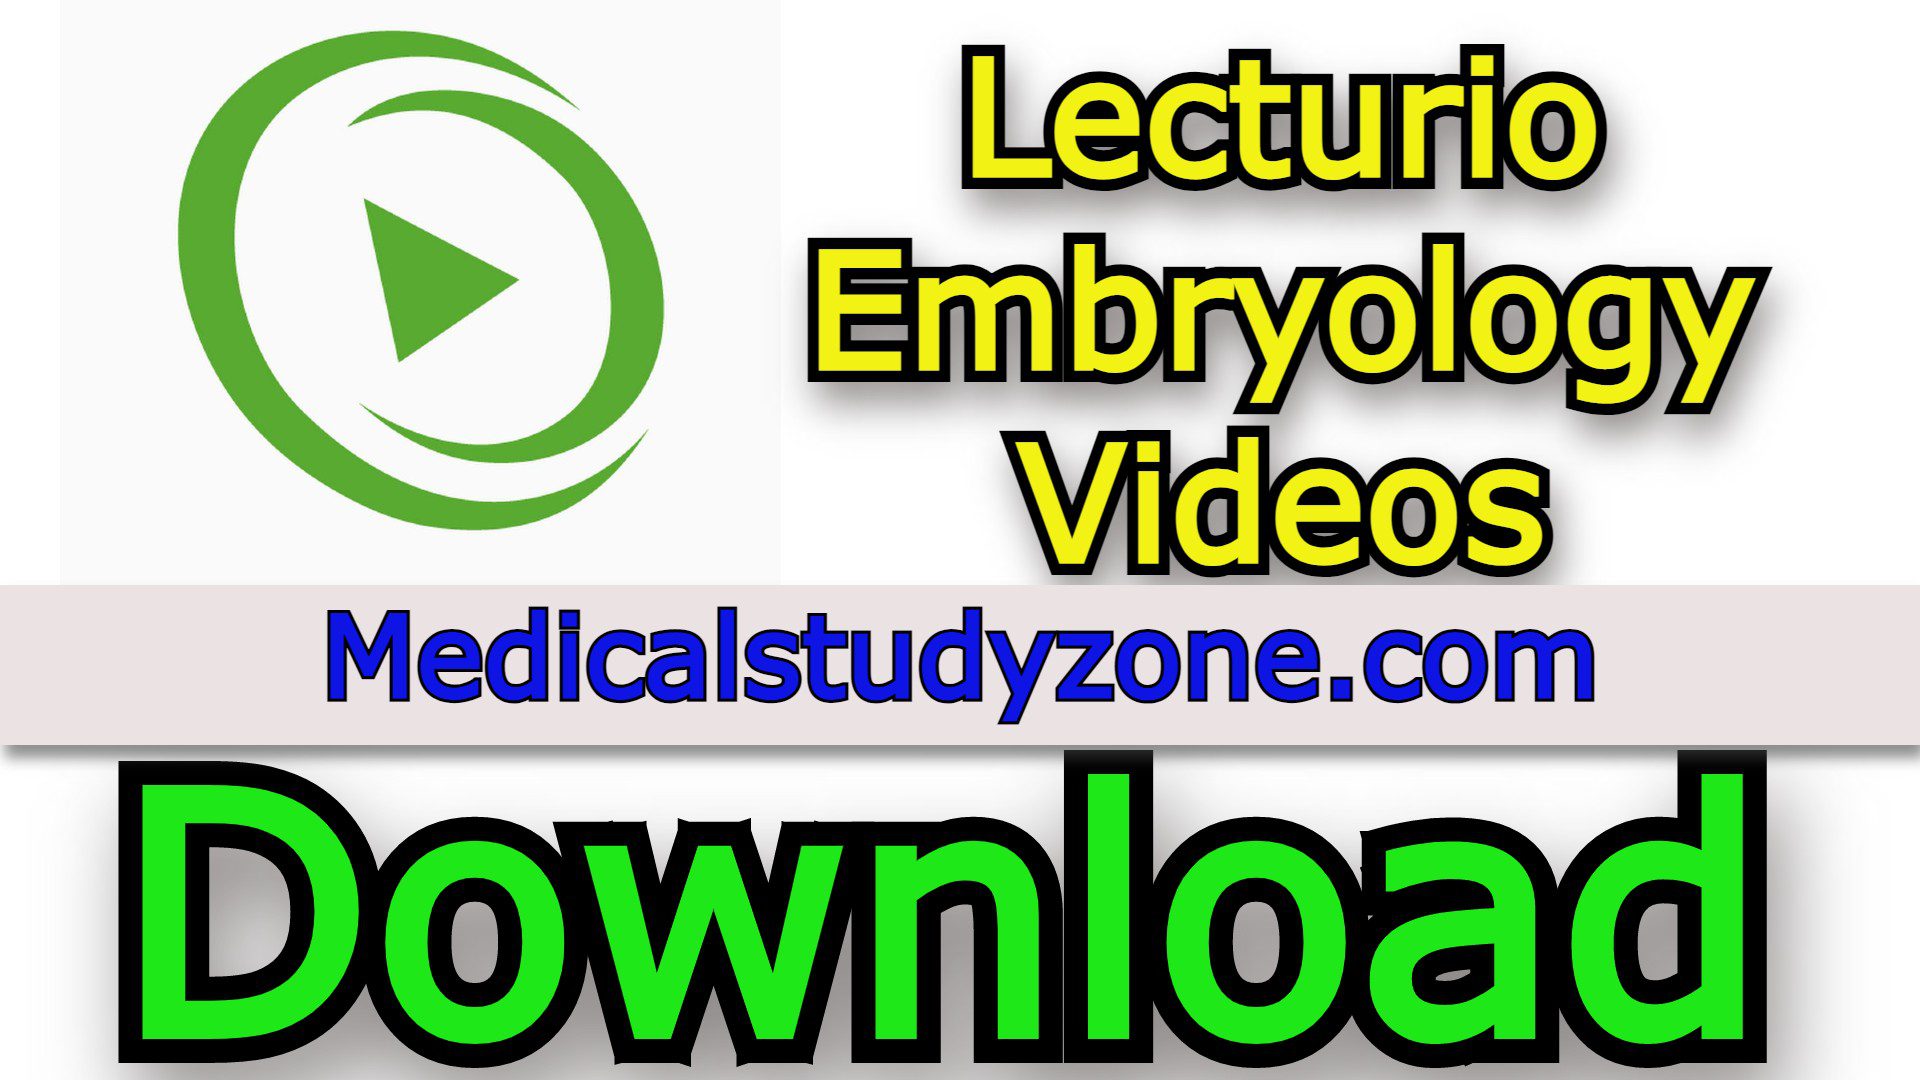 Lecturio Embryology Videos 2023 Free Download